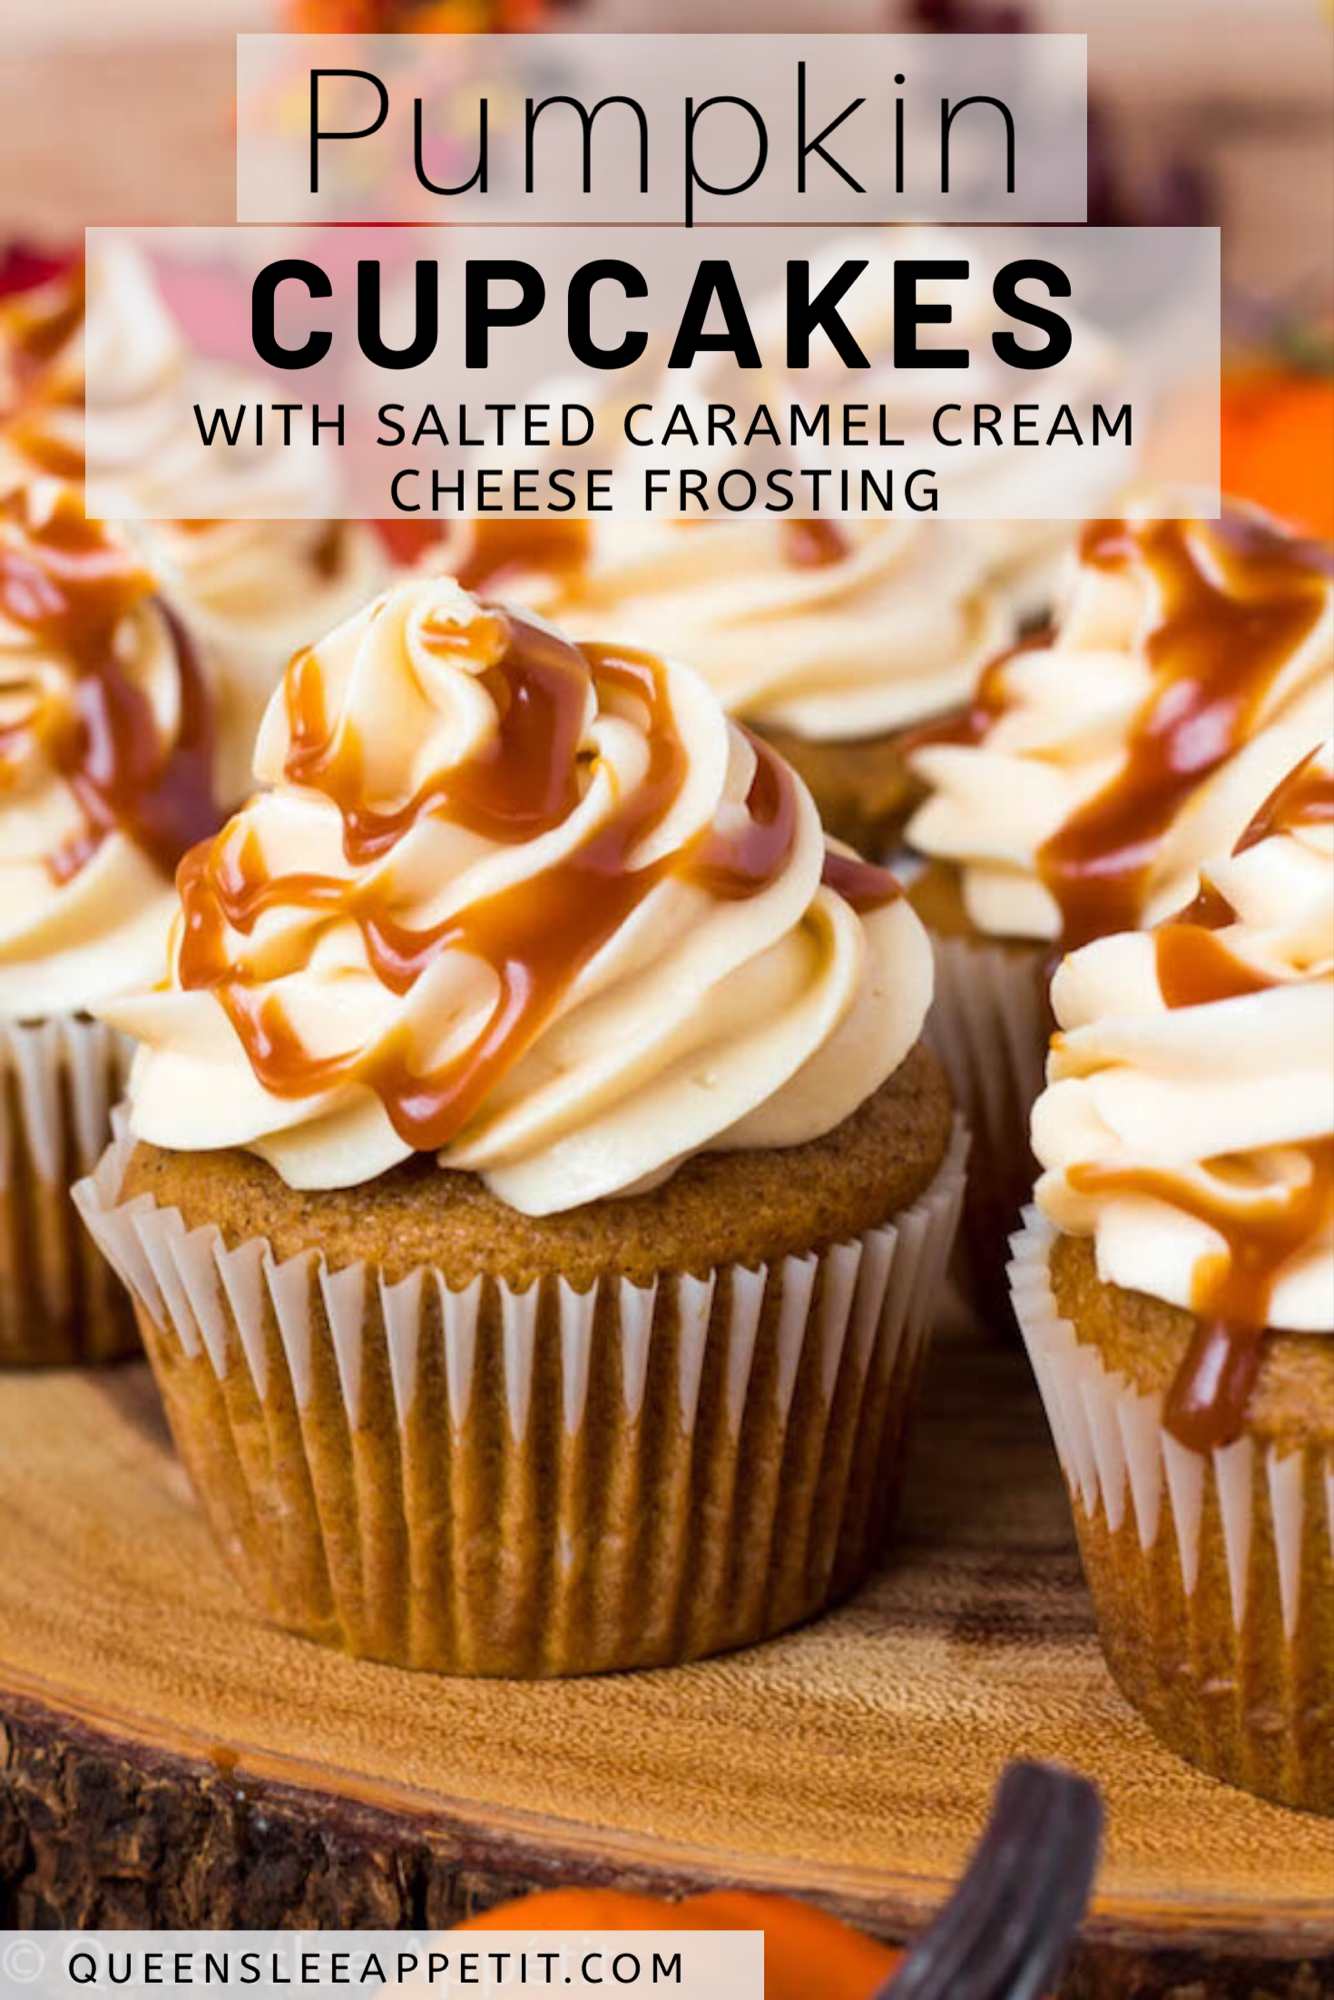 Pumpkin Cupcakes with Salted Caramel Cream Cheese Frosting -   17 desserts Caramel cream cheeses ideas